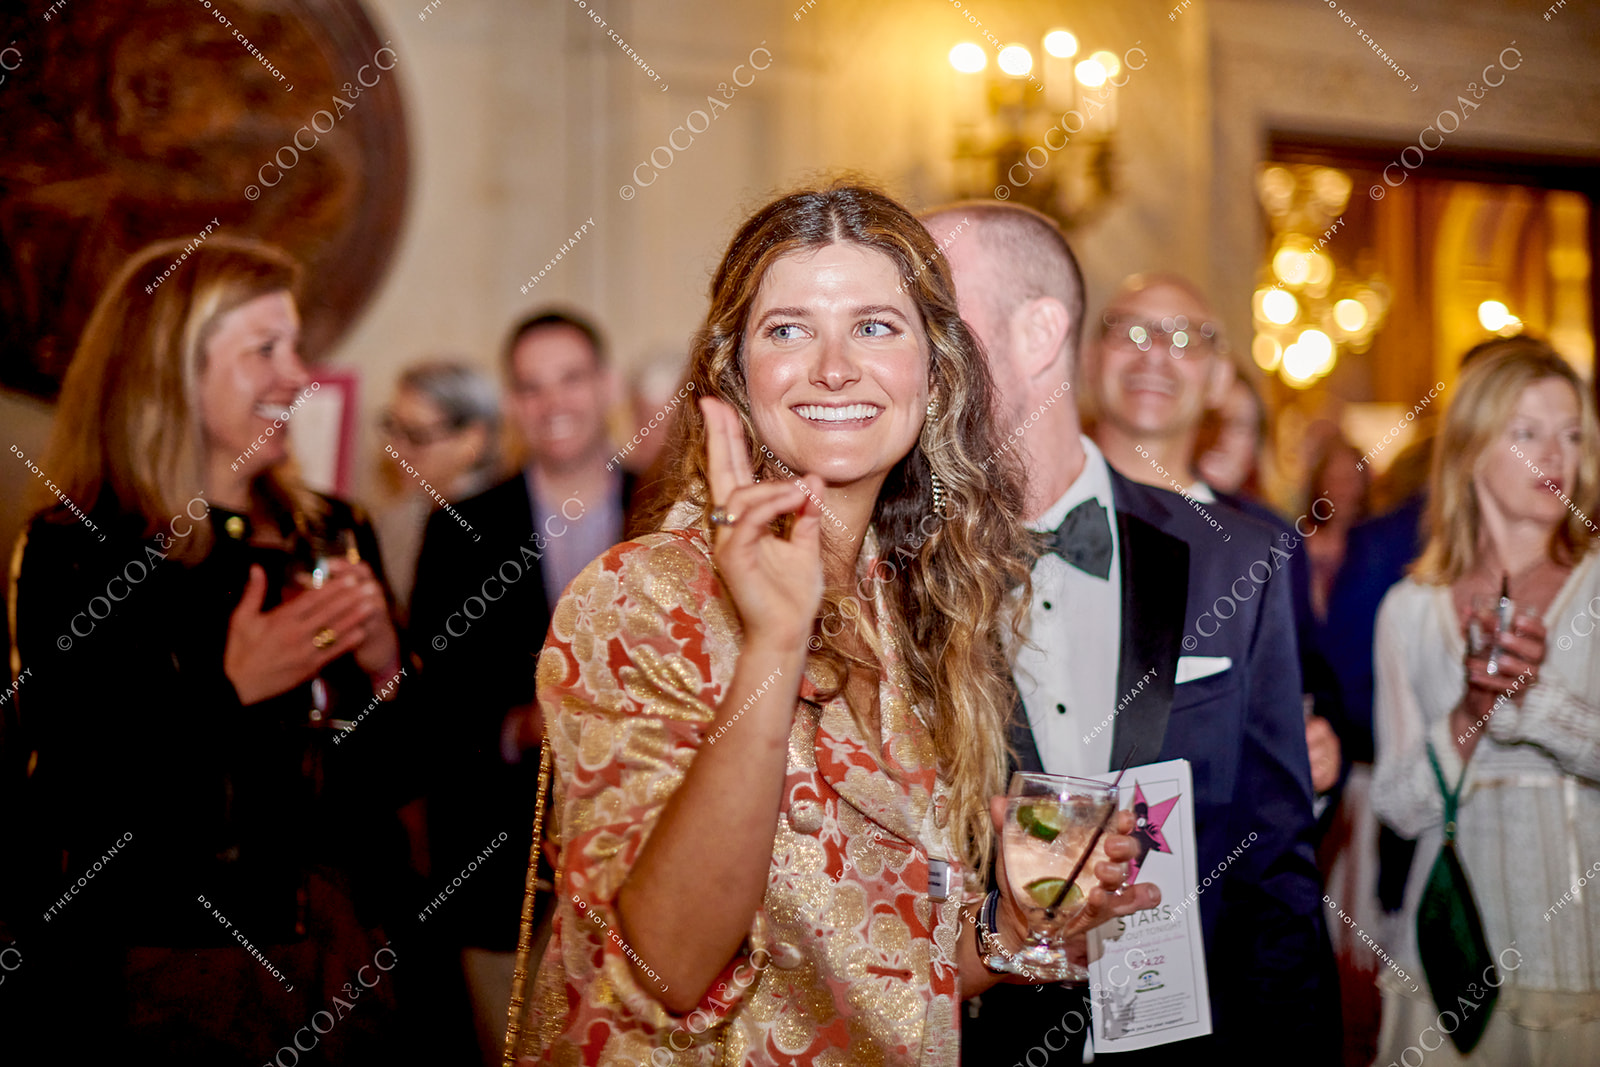 Event guests in Ochre Court Mansion in Newport, RI at Star Kids' 2022 Stars Are Out Gala captured by Cocoa & Co.